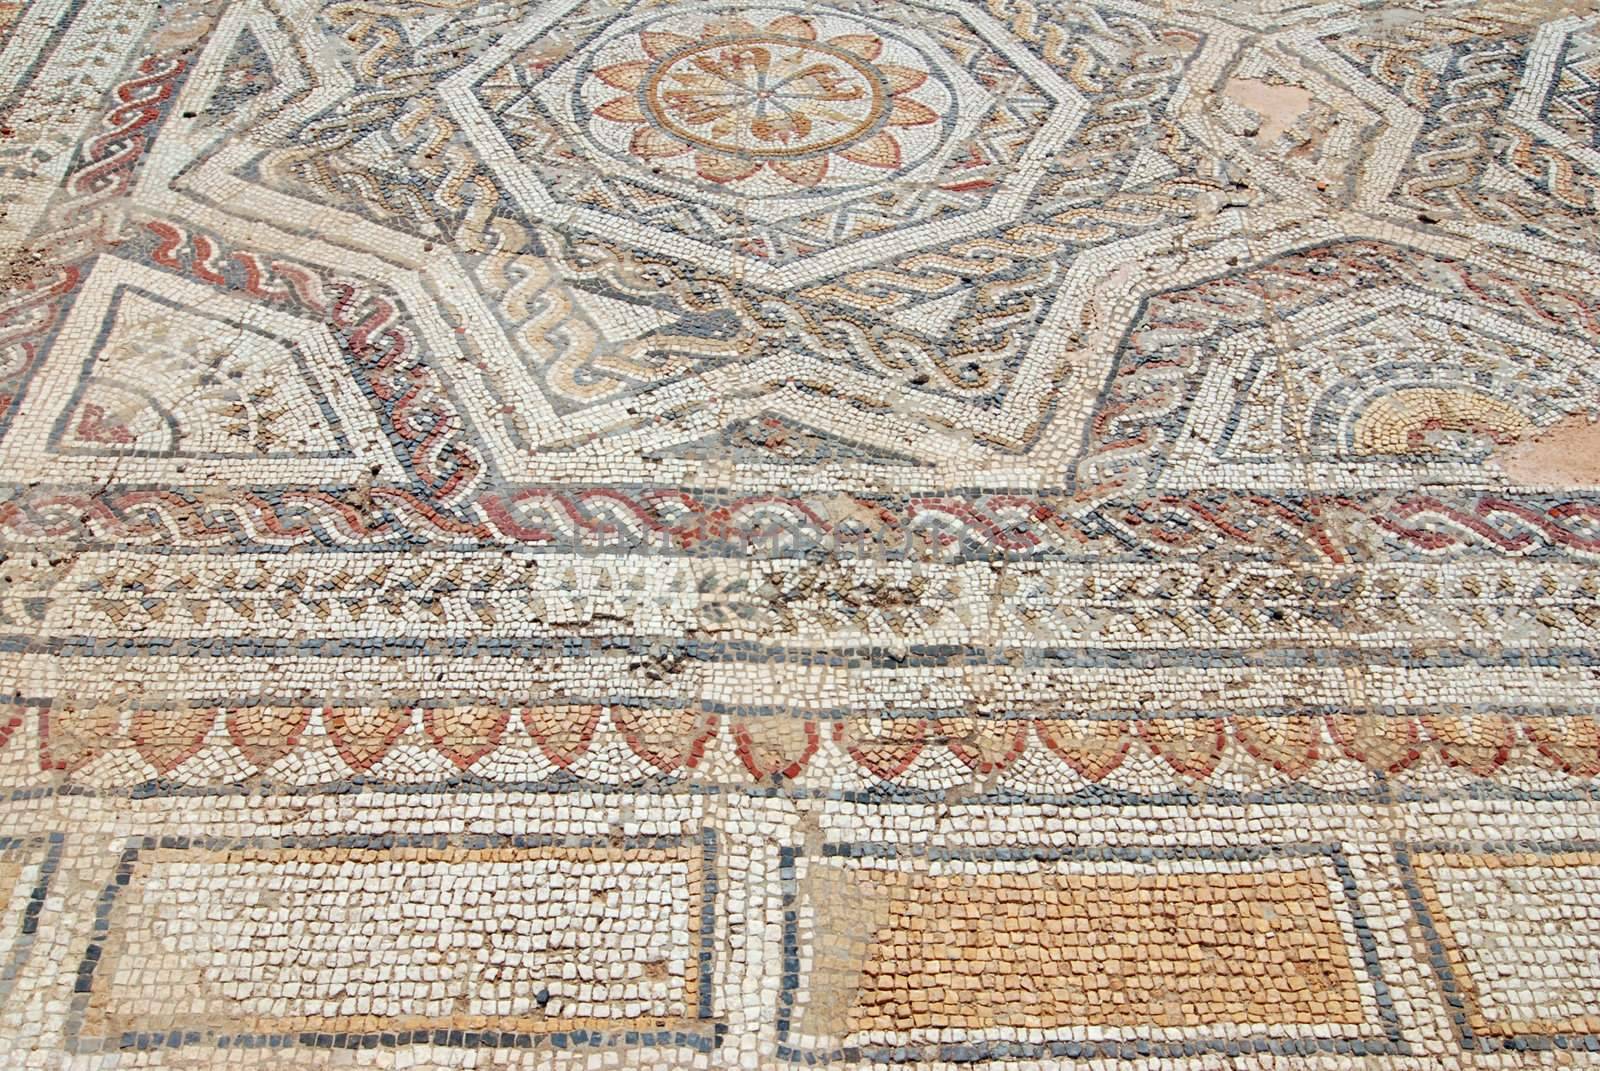 Ancient roman mosaic by fyletto